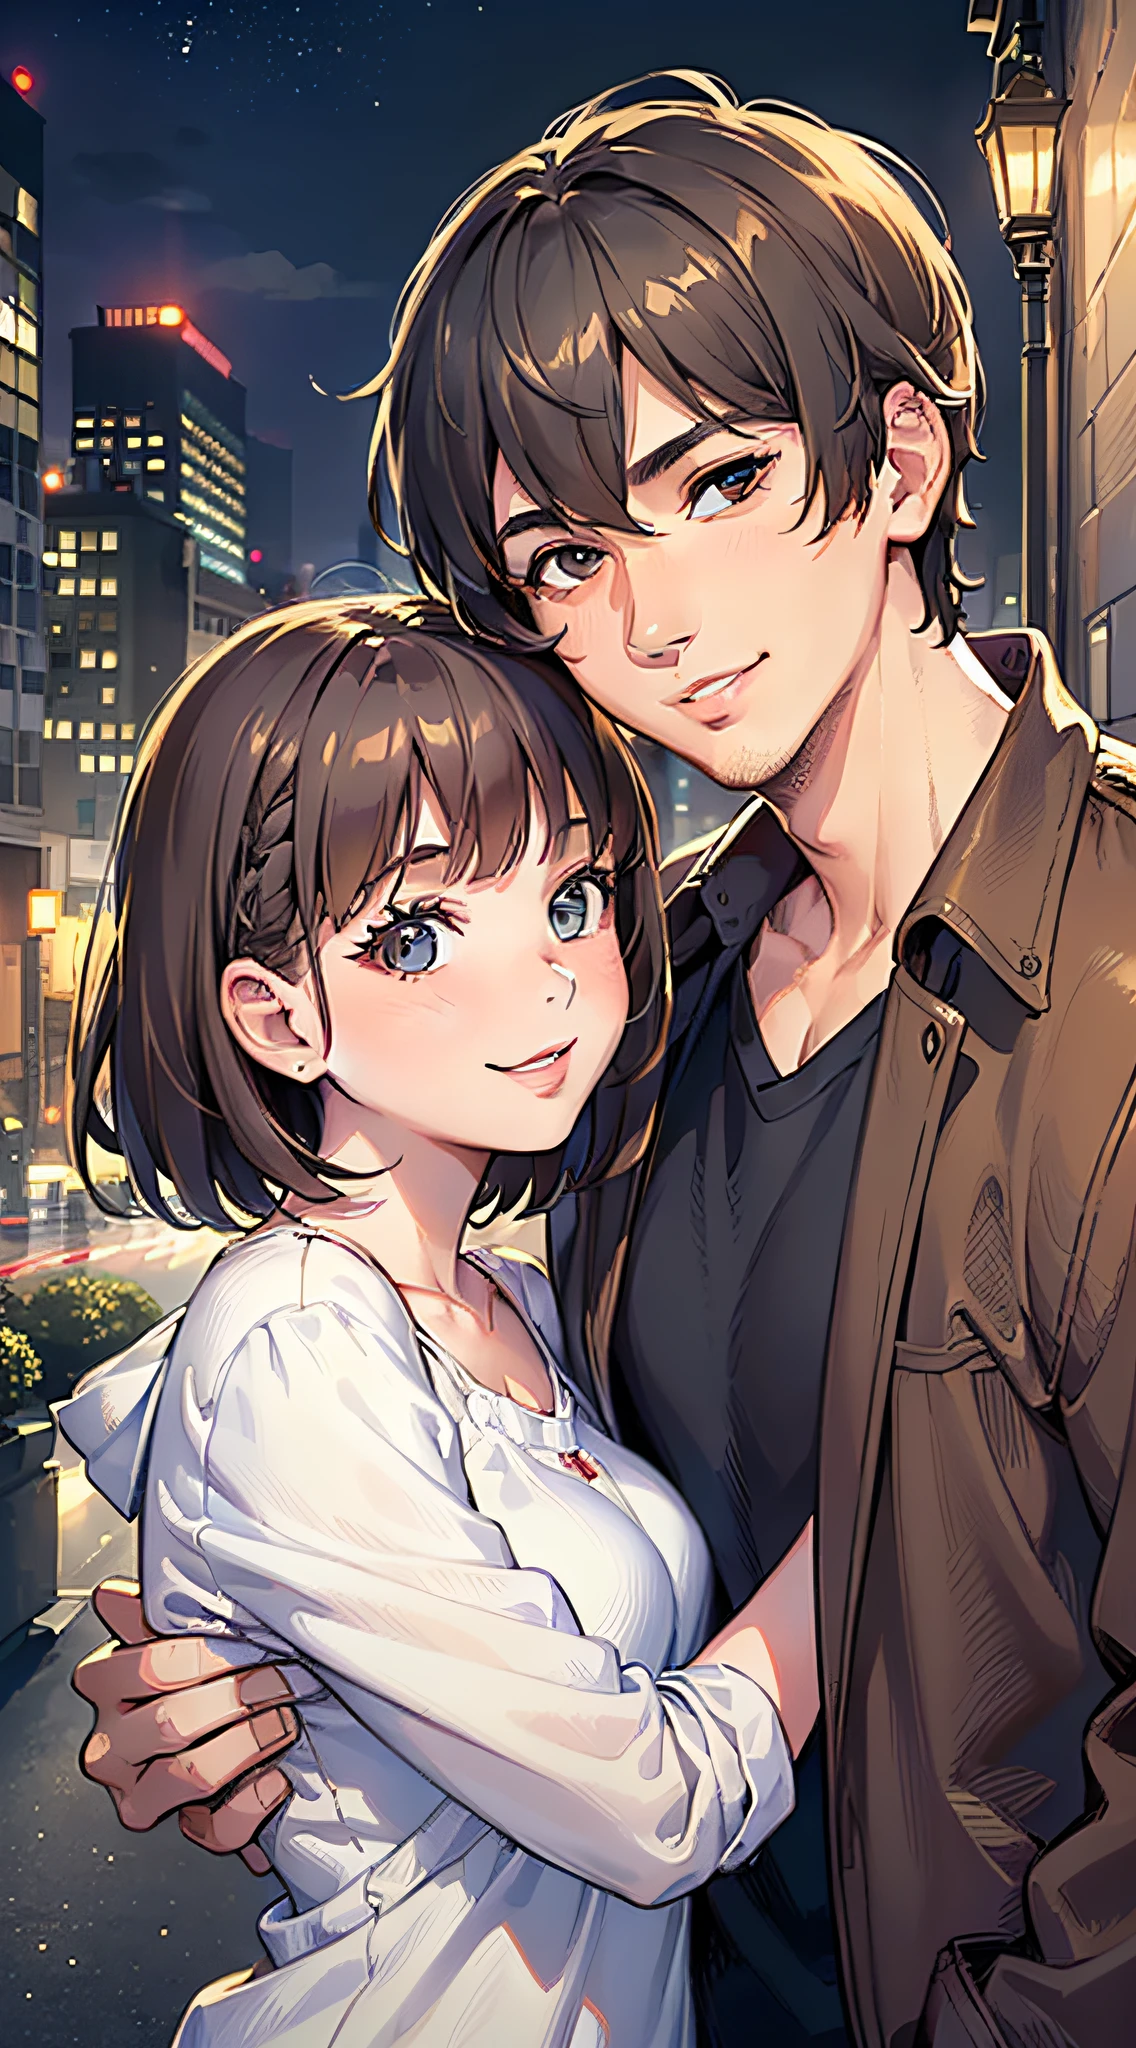 (2 people), (masterpiece, superlative, realistic), ((1 girl, brunette hair, short Bob,))), ((1 young man, handsome, short hair, smile, shut up, portrait, extremely detailed face, casual clothes)), night, city, hug